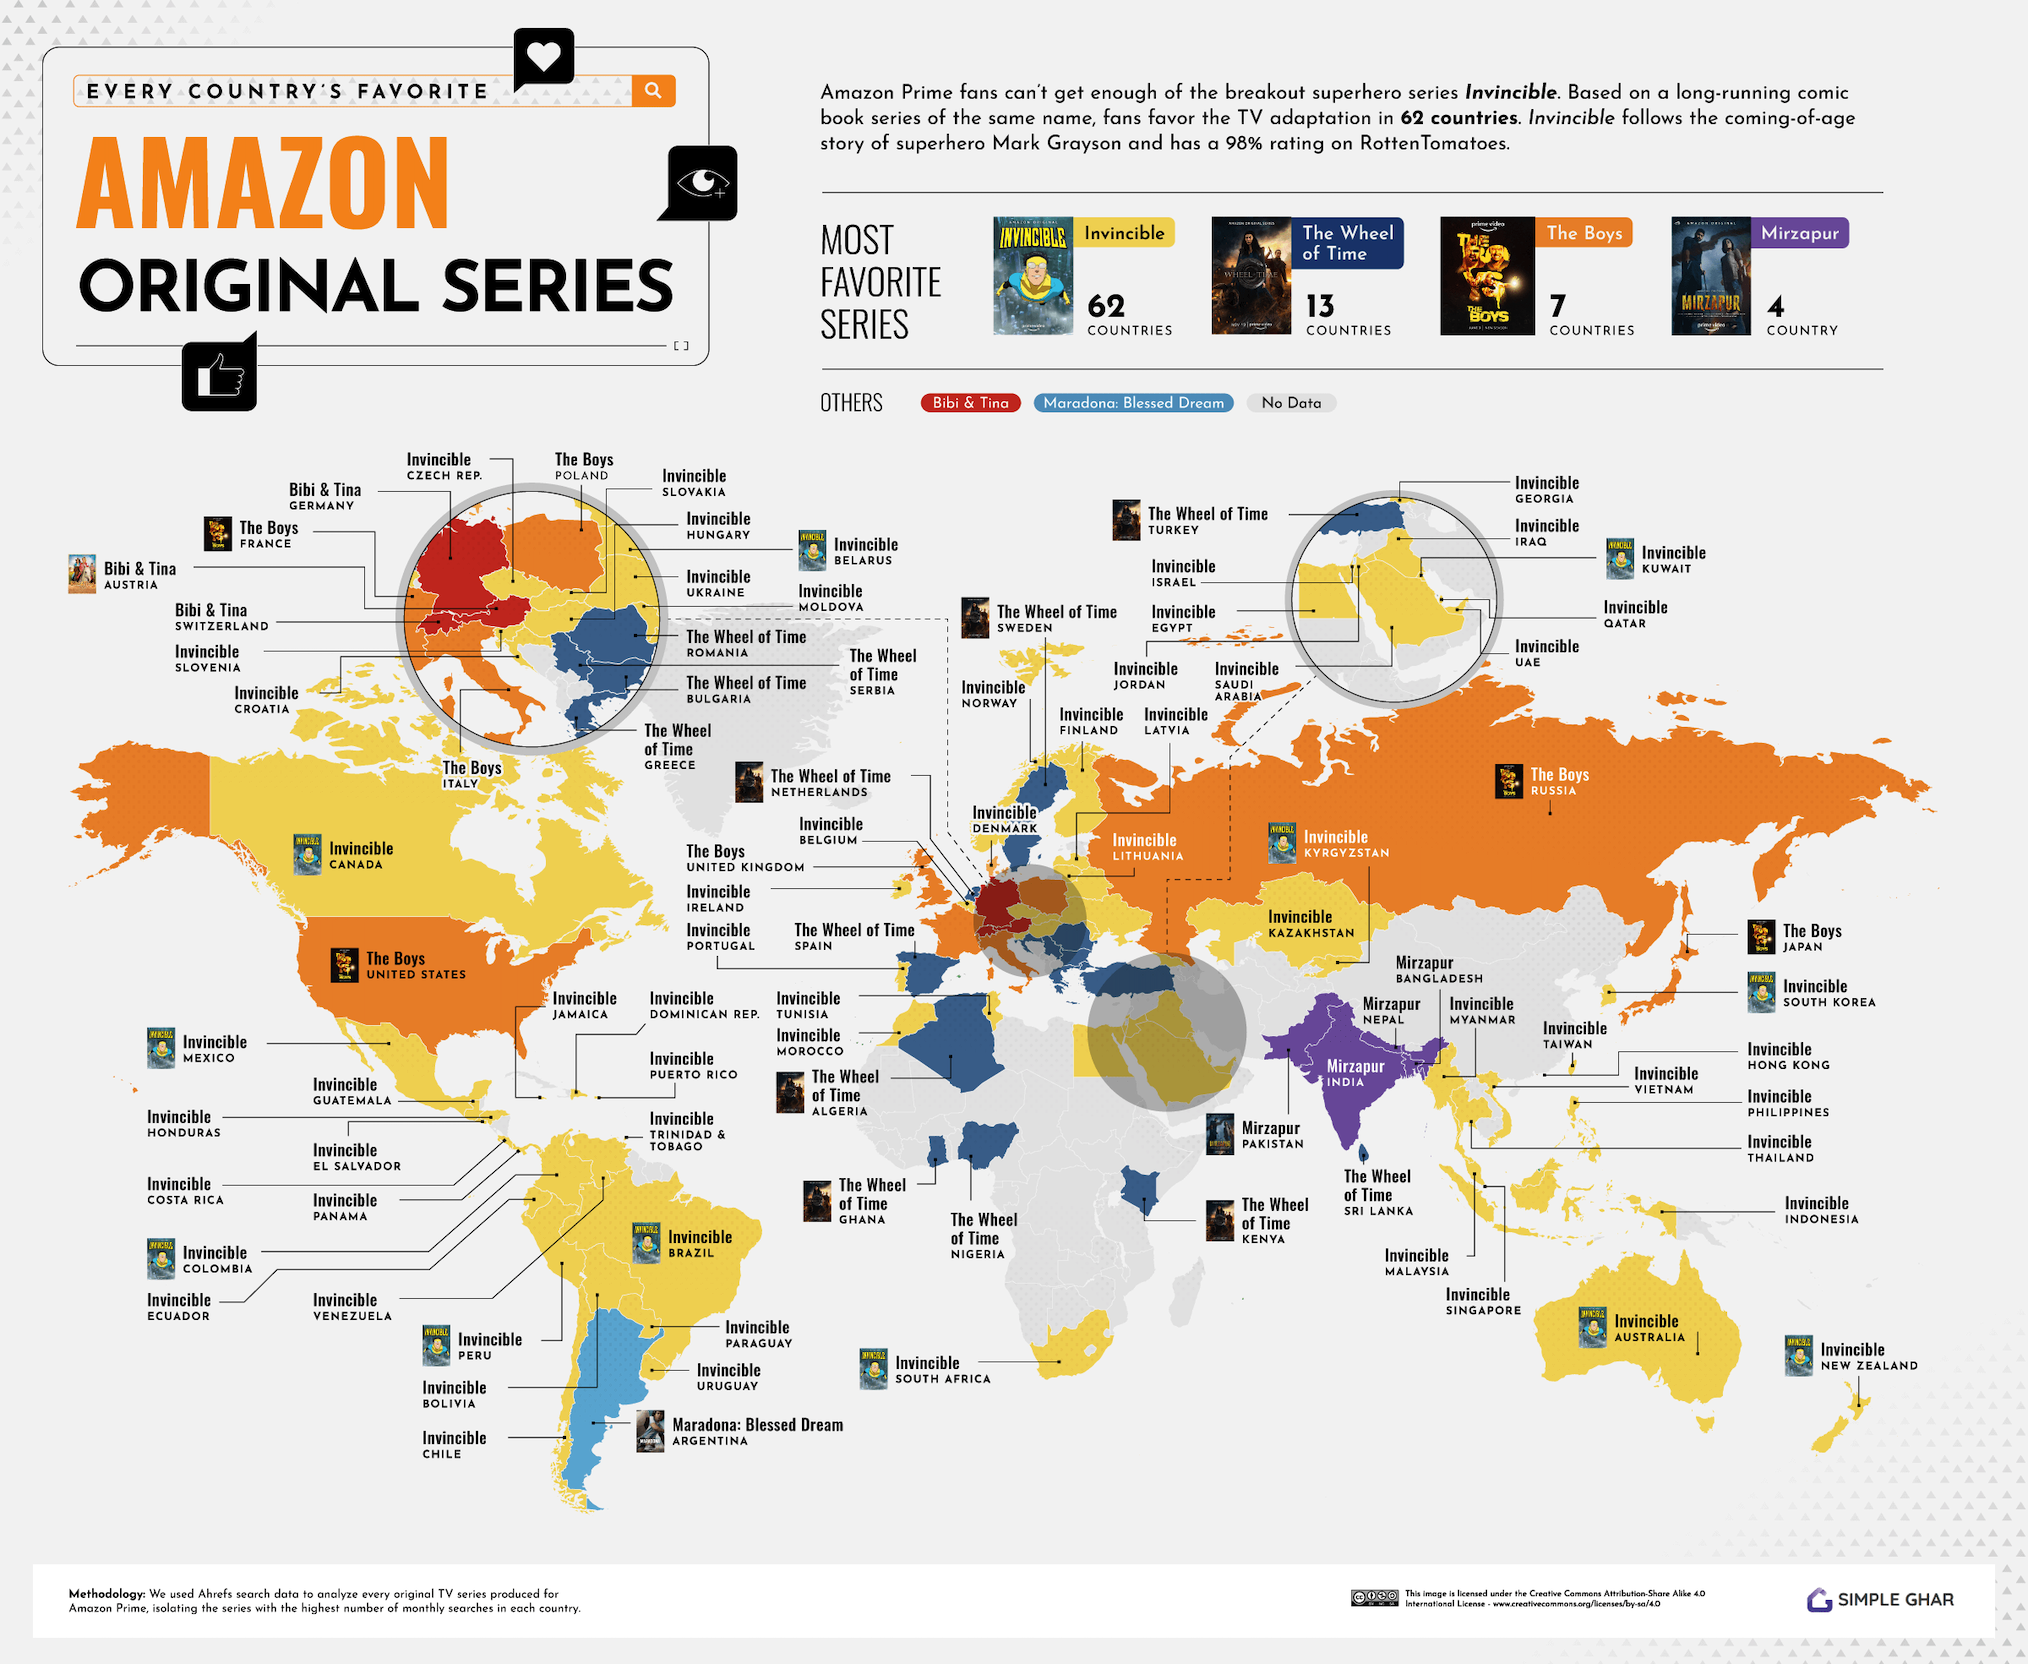 Every country's favorite Amazon Prime Video series